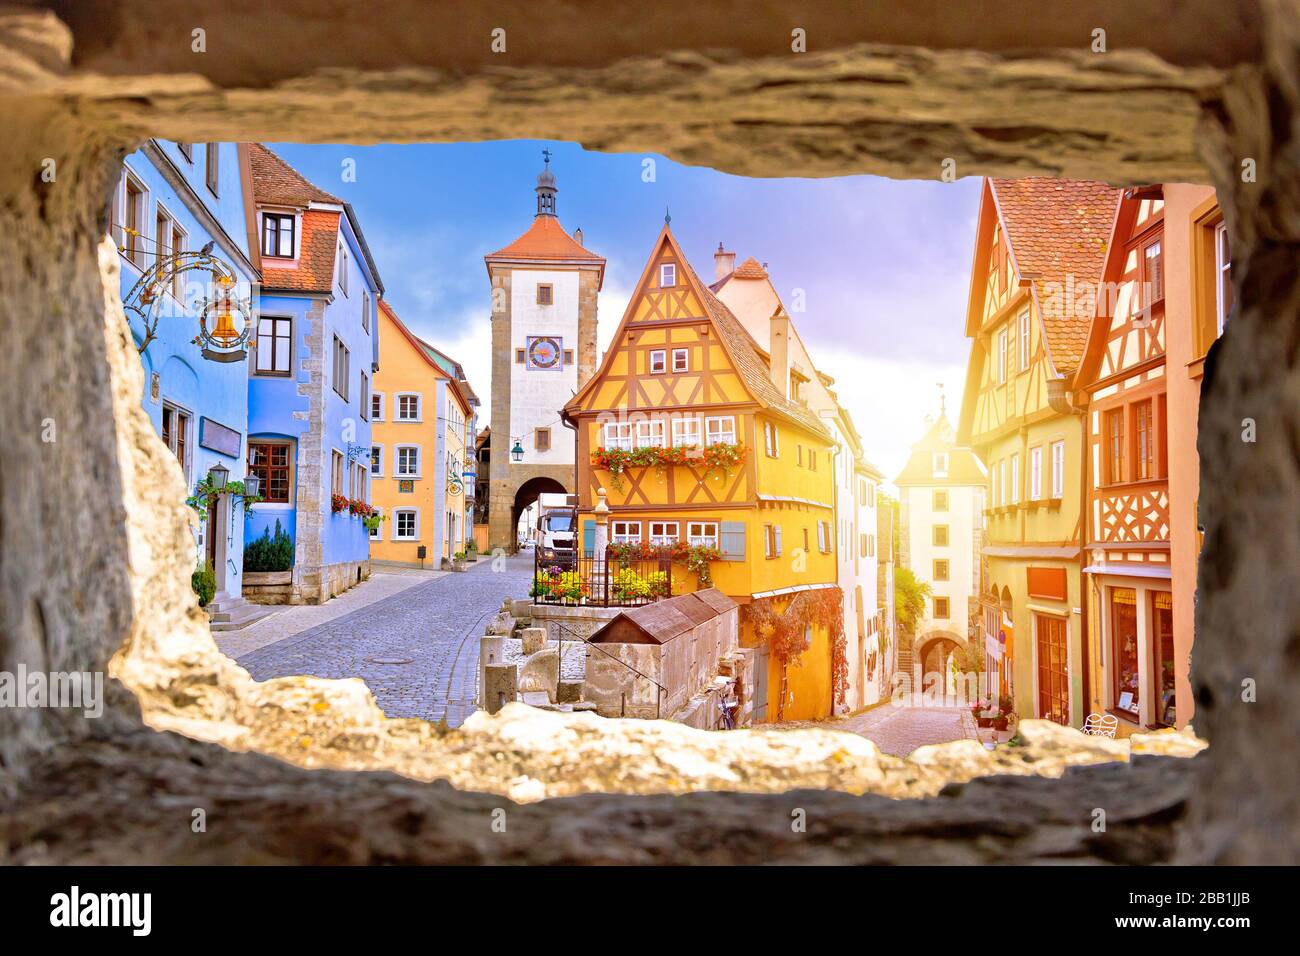 Cobbled street and architecture of historic town of Rothenburg ob der Tauber view through stone window, Romantic road of Bavaria region of Germany Stock Photo